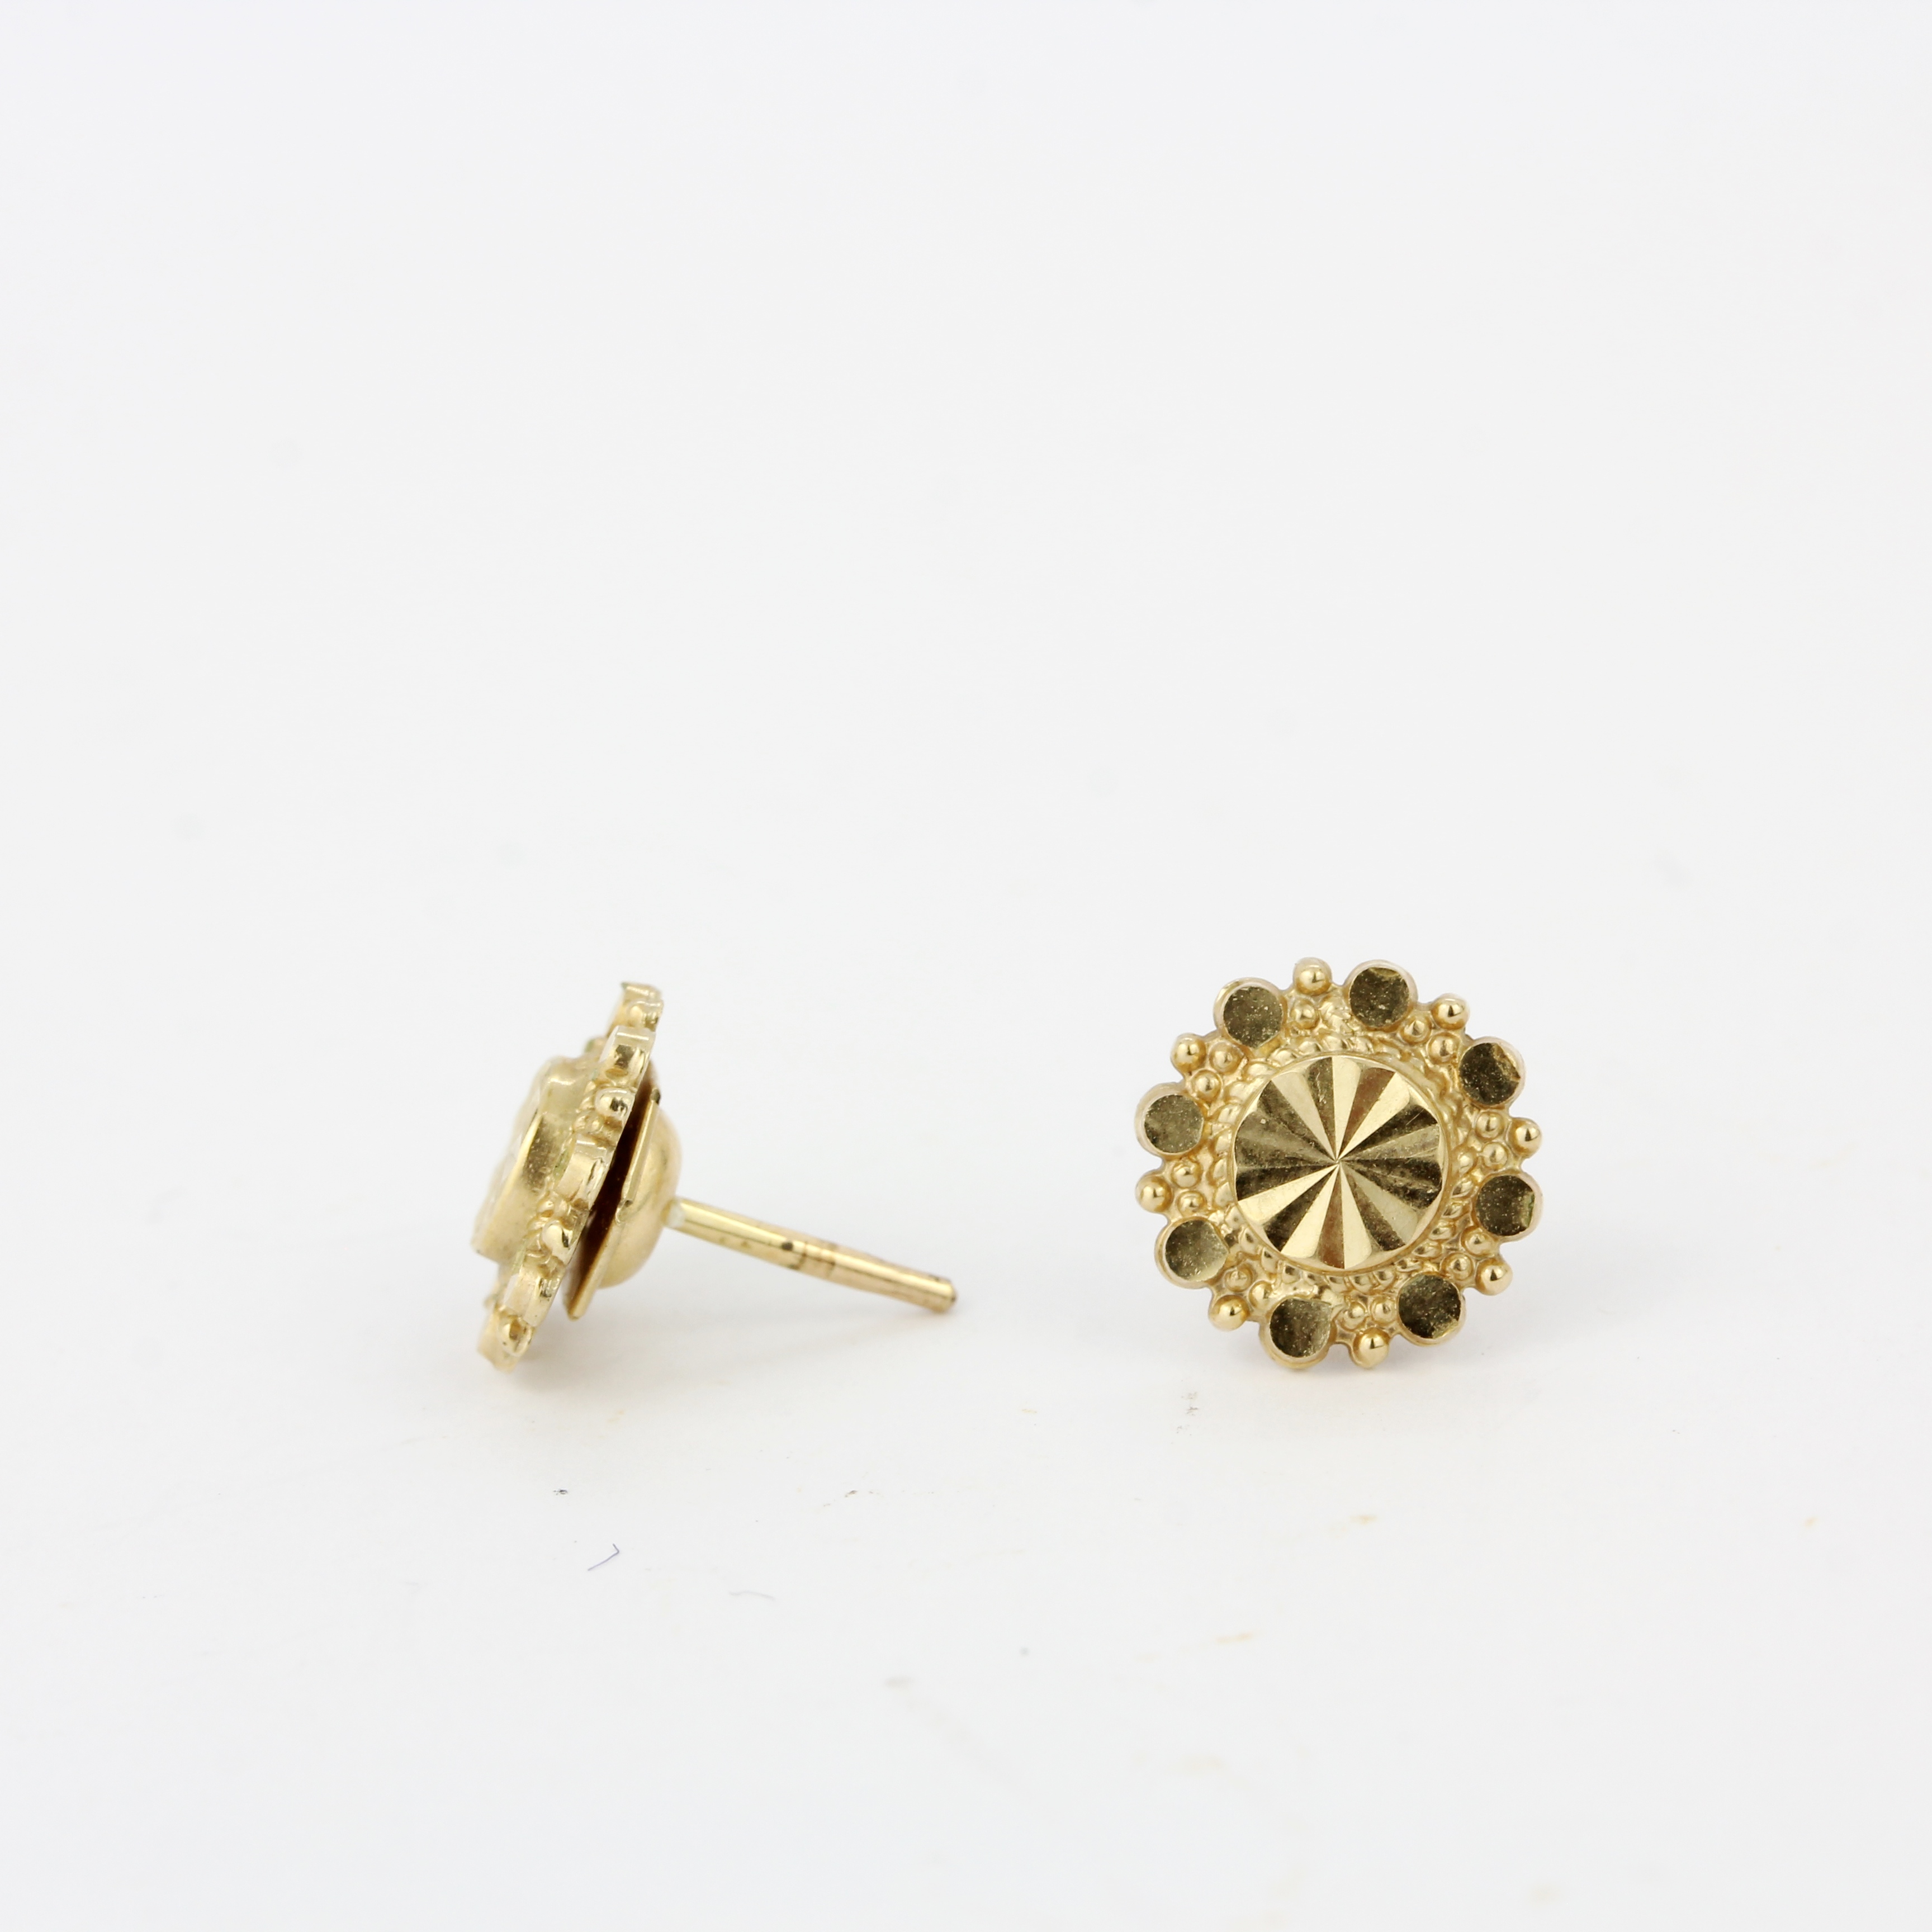 A pair of 9ct yellow gold stud earrings, Dia. 1cm. - Image 2 of 2